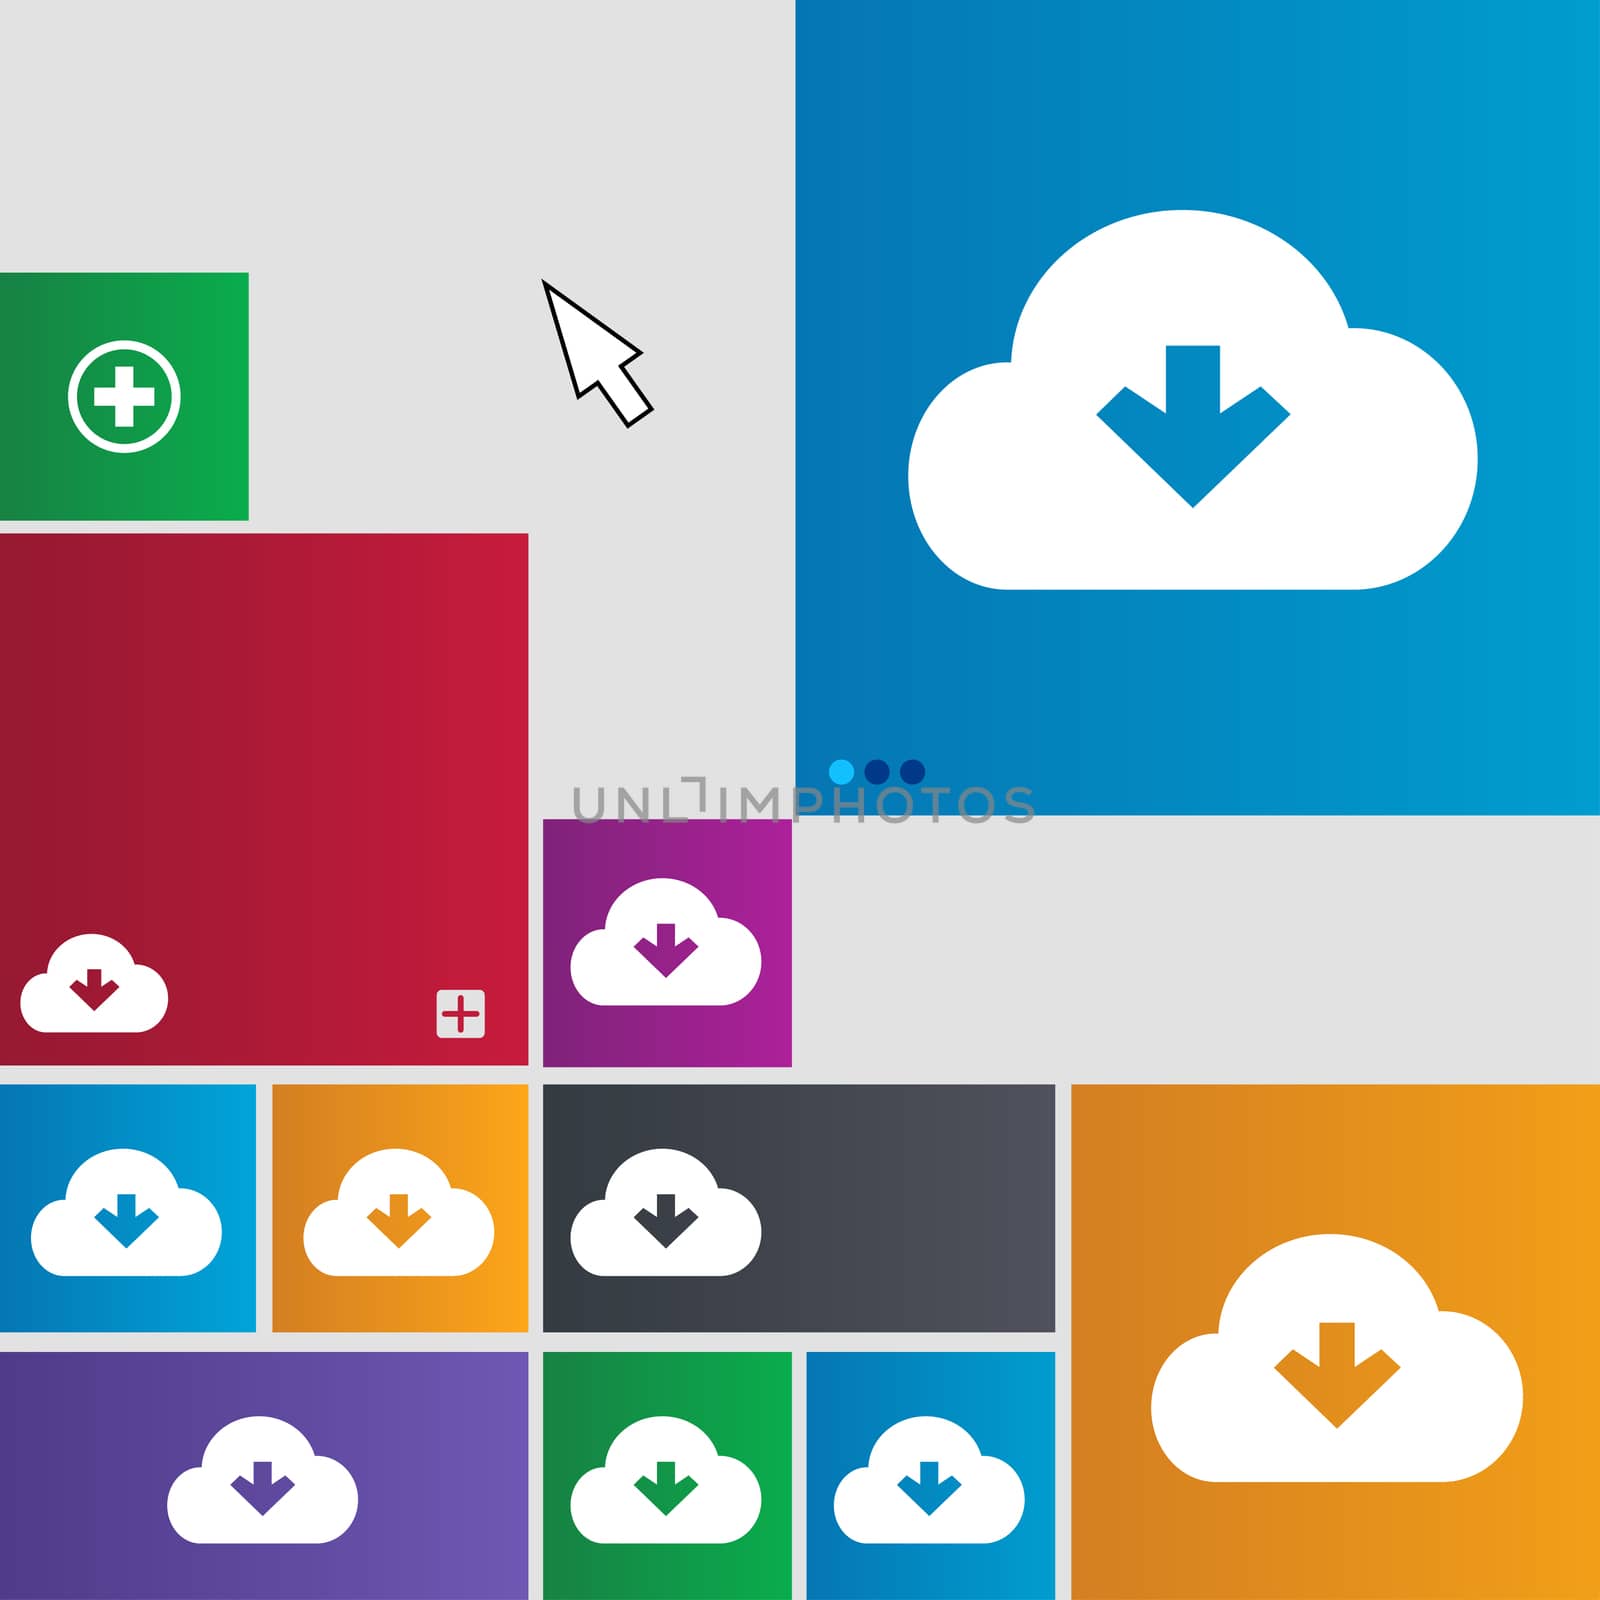 Download from cloud icon sign. Metro style buttons. Modern interface website buttons with cursor pointer. illustration